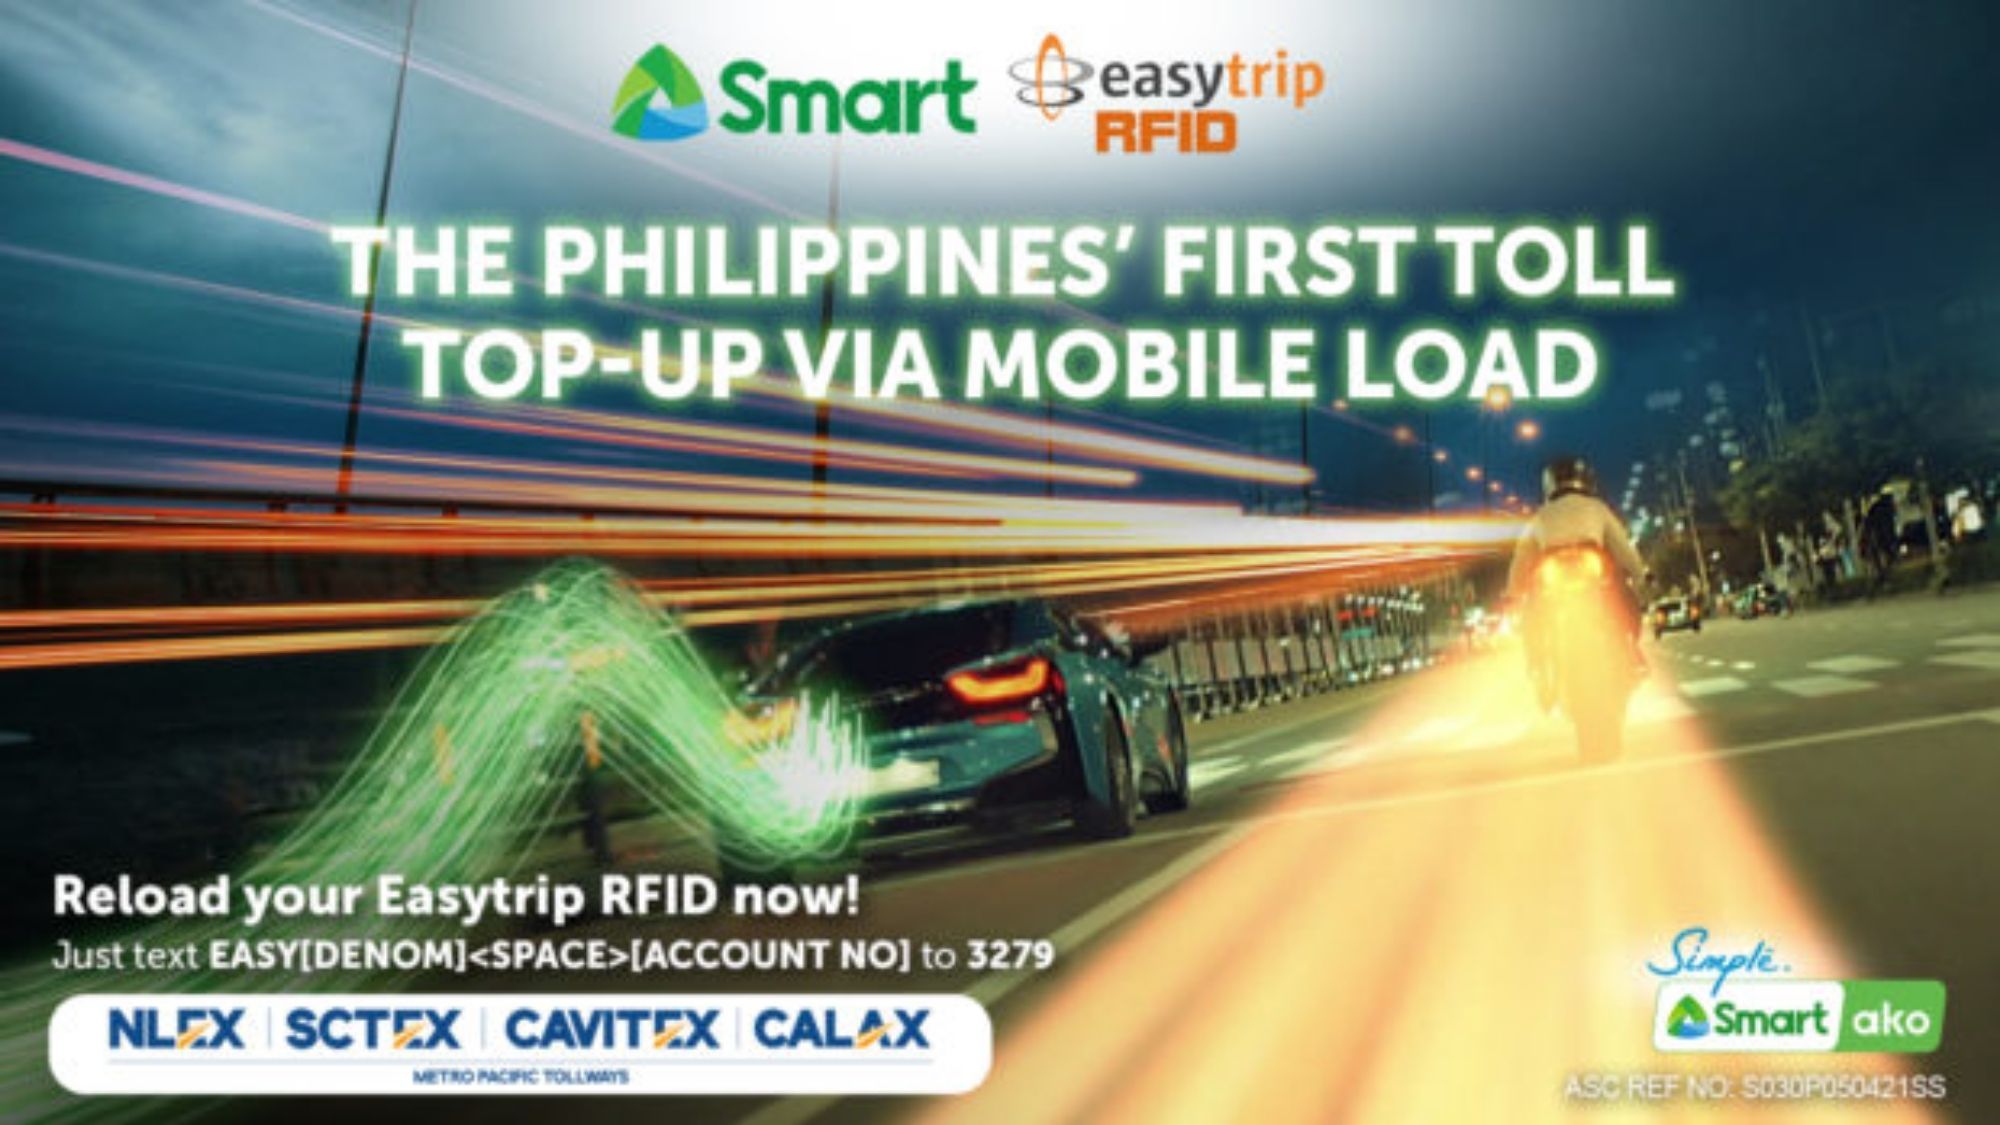 MPTC’s Easytrip users can now top-up via mobile phone